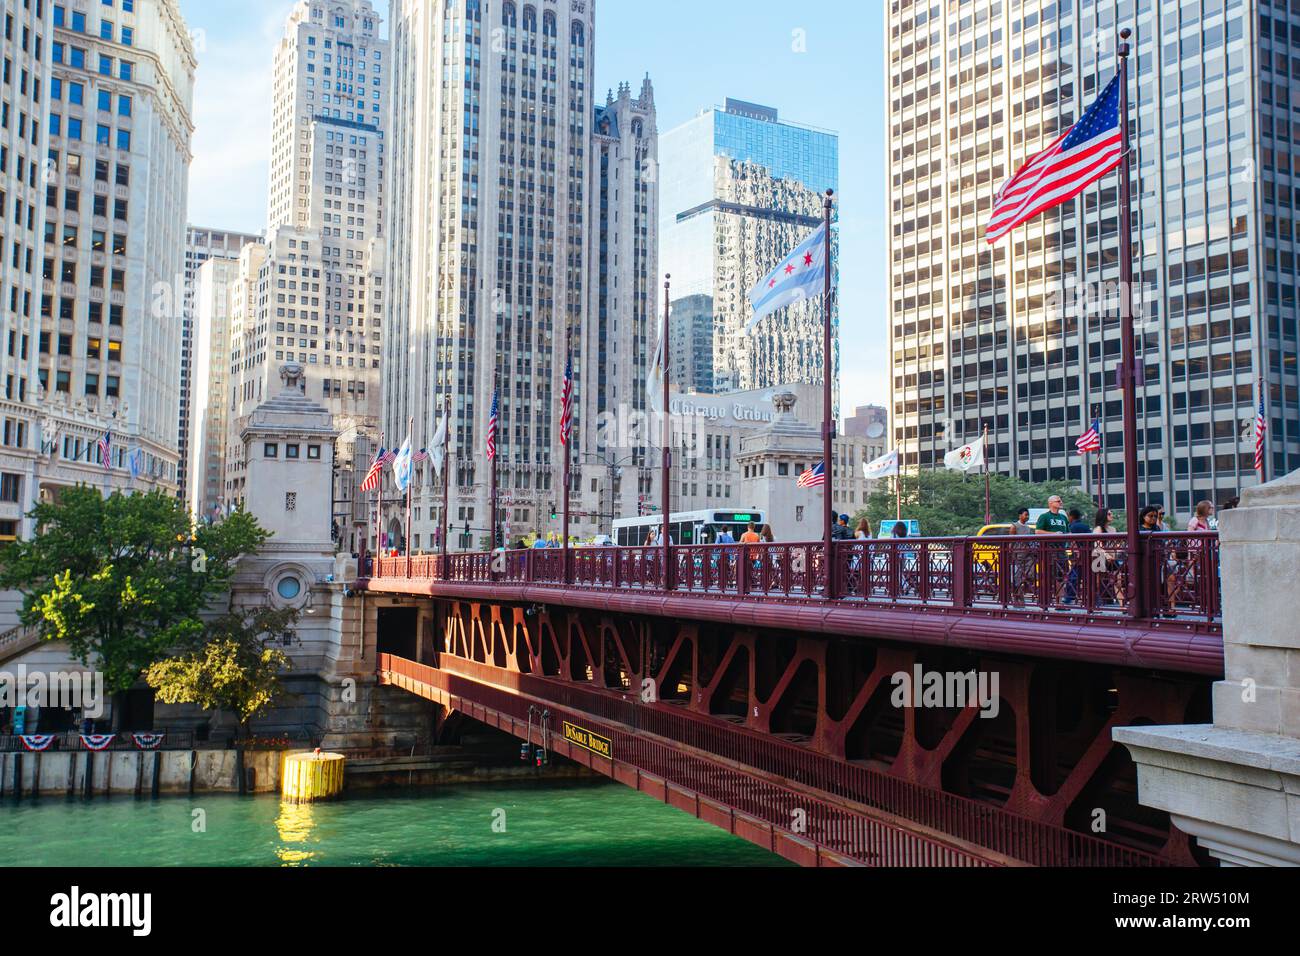 Chicago, USA, July 8th 2014: The iconic DuSable bridge and Michigan Ave in Chicago, Illinois, USA on a hot summer's day Stock Photo